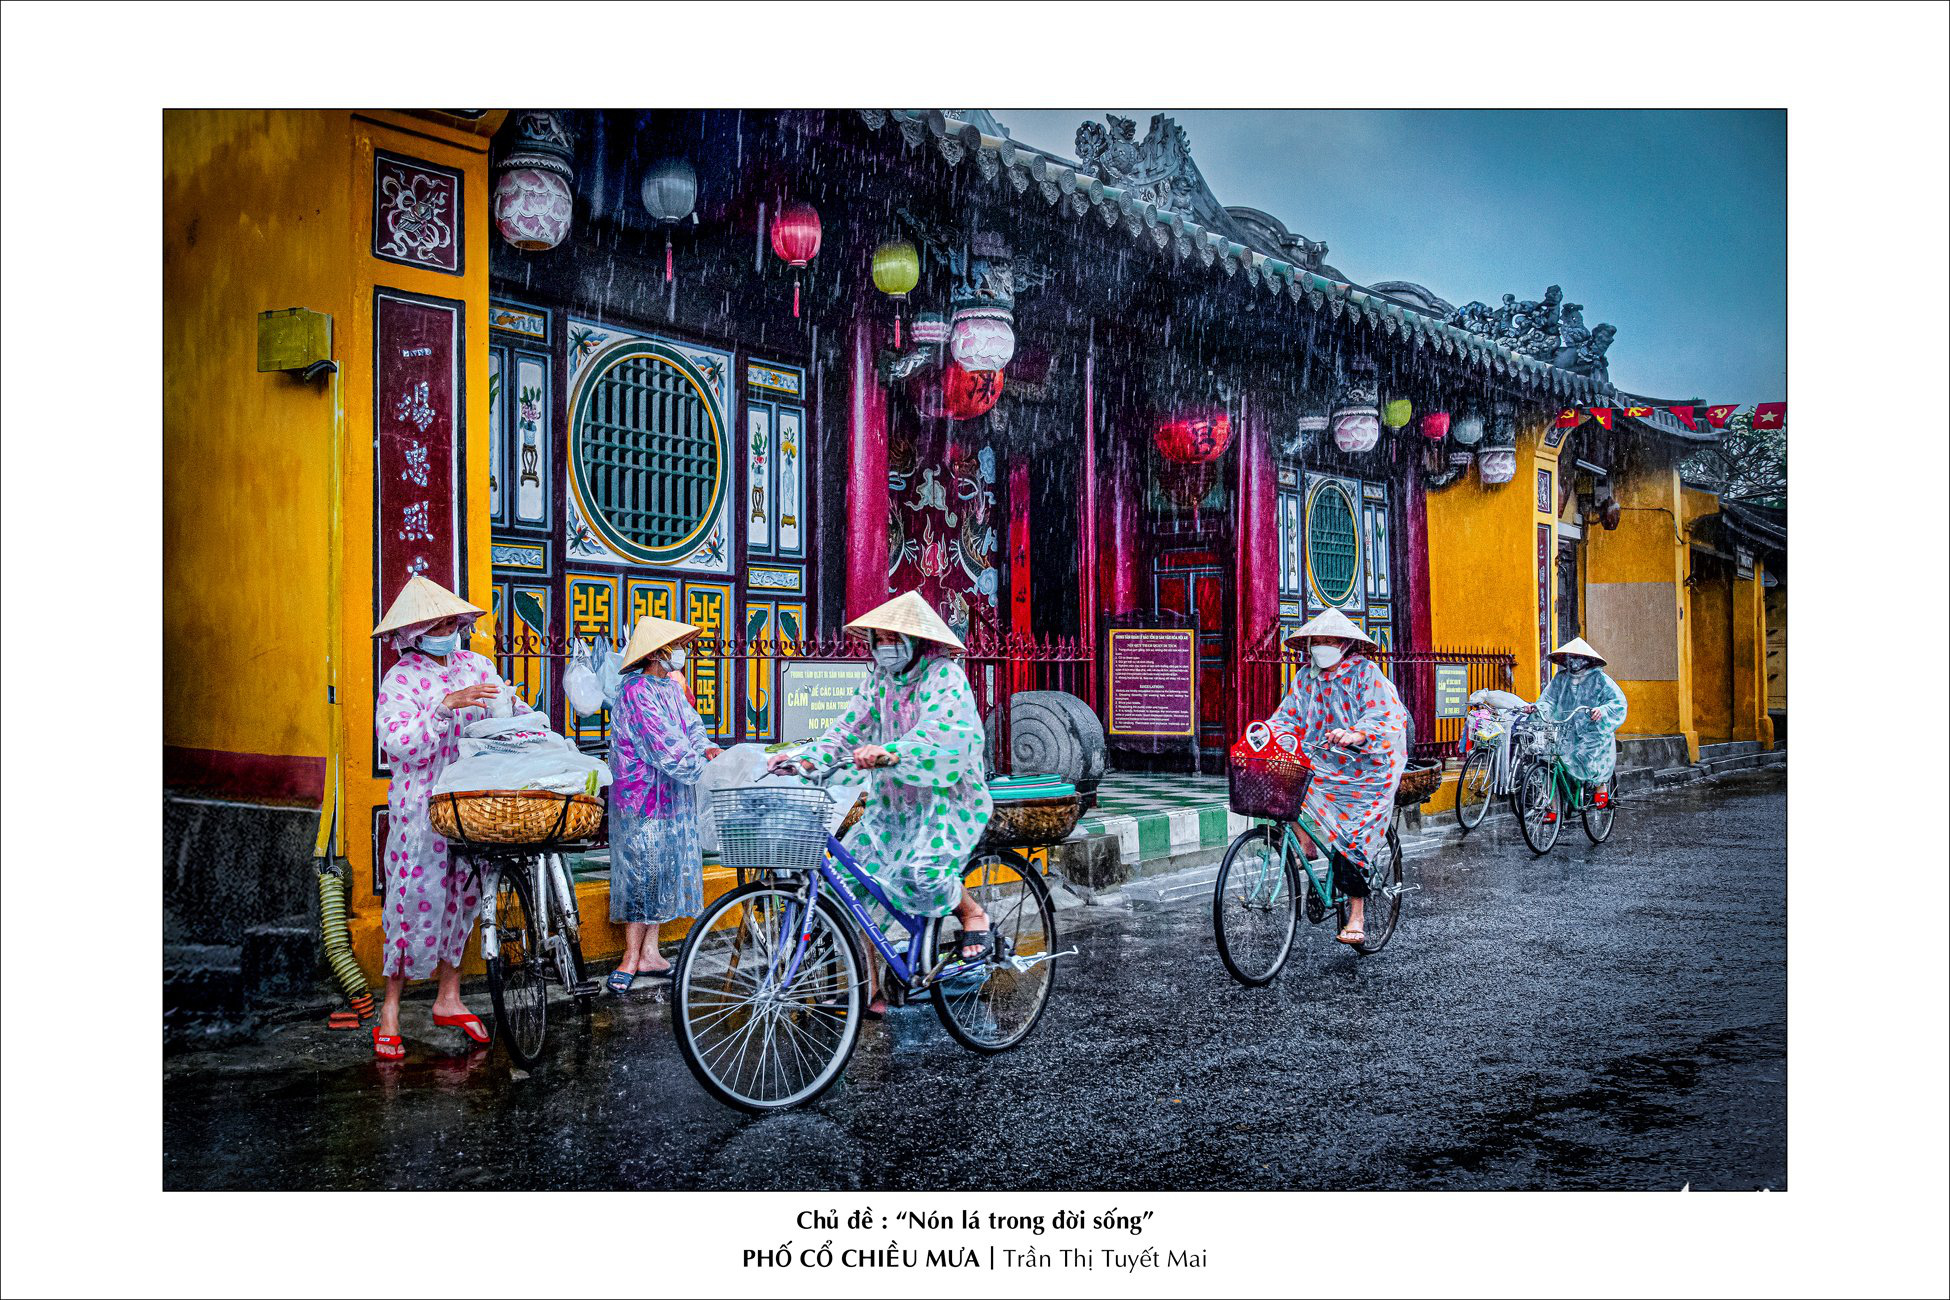 Women wearing ‘non la’ ride bicycles in Hoi An Ancient Town in Quang Nam Province in this photo on display at the Ho Chi Minh City Photography Association (HOPA) headquarters.